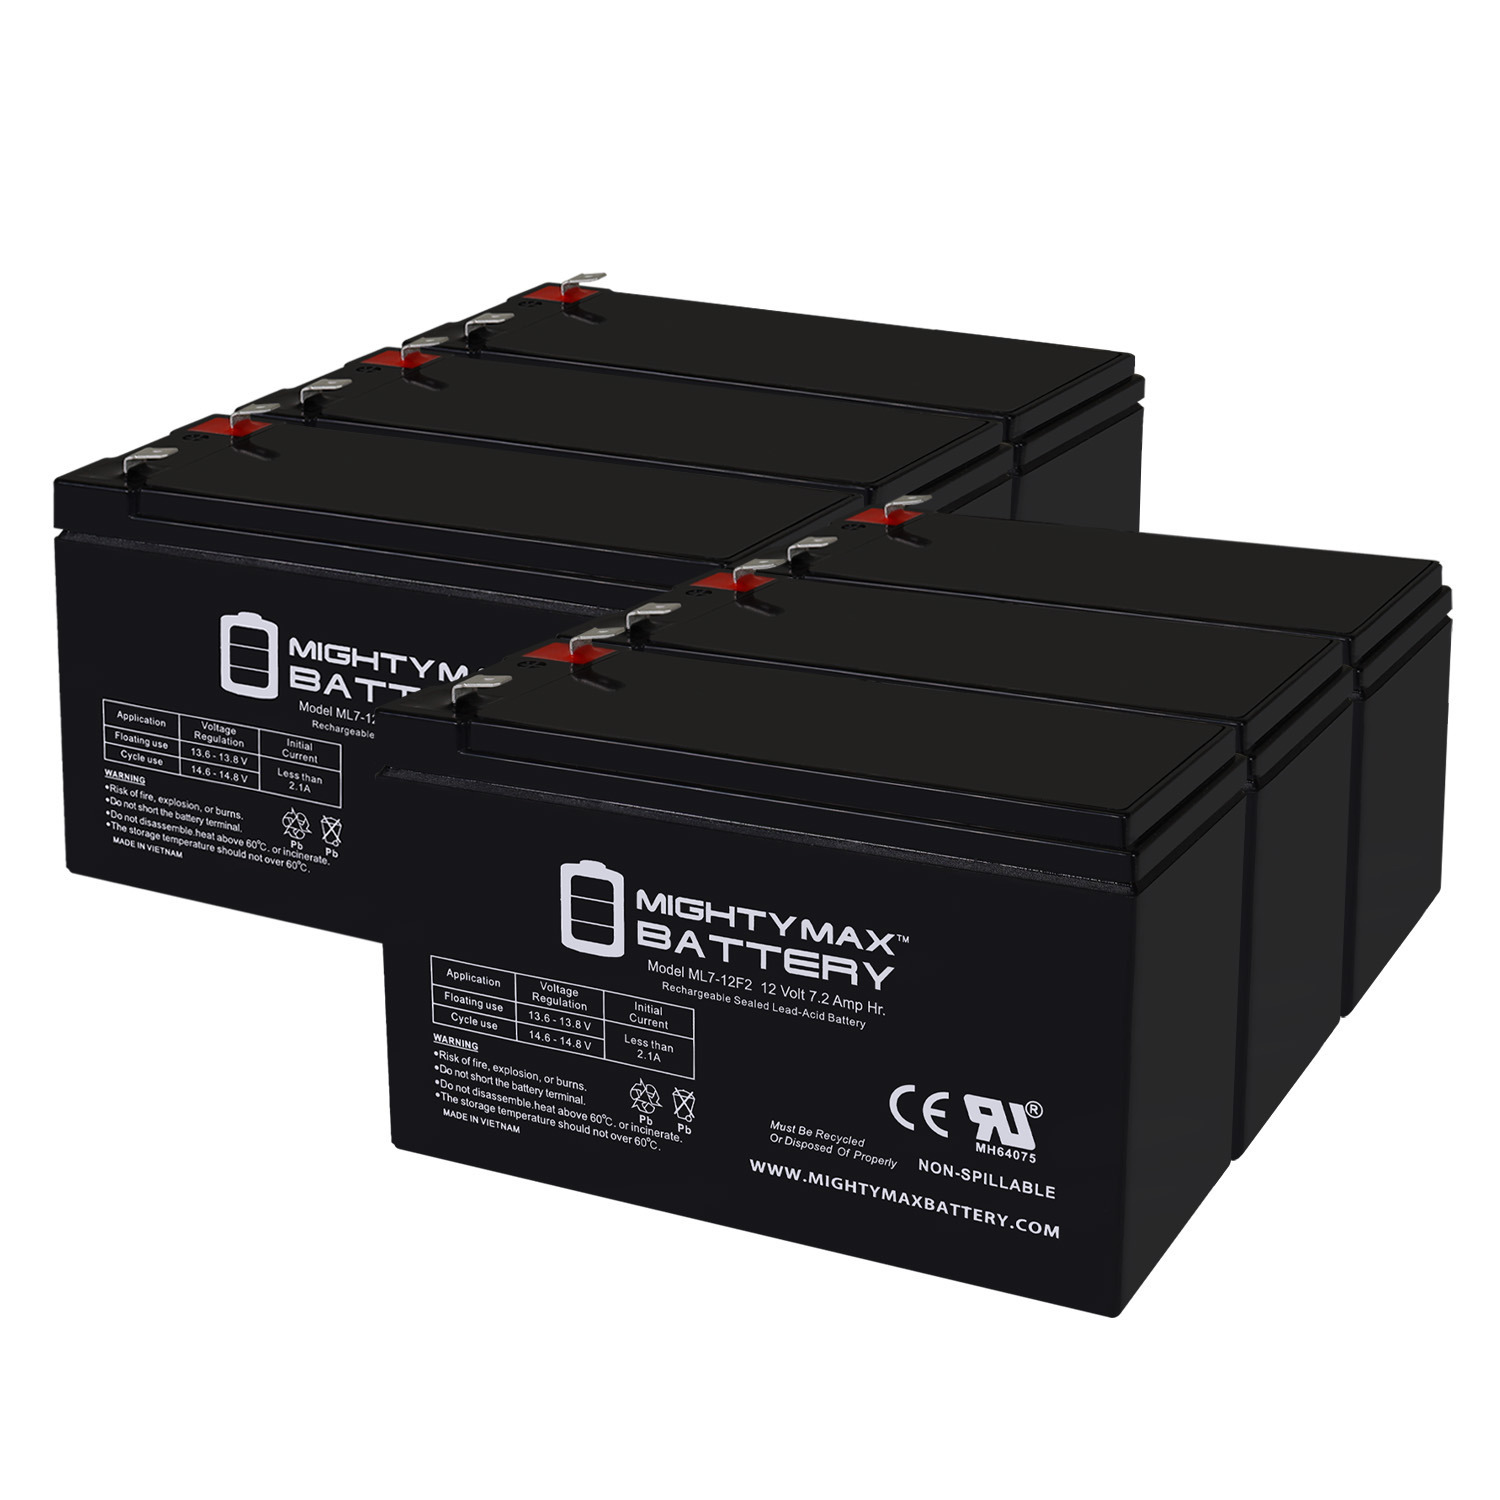 12V 7Ah F2 Replacement Battery for Eaton Powerware PW9120-1500 - 6 Pack